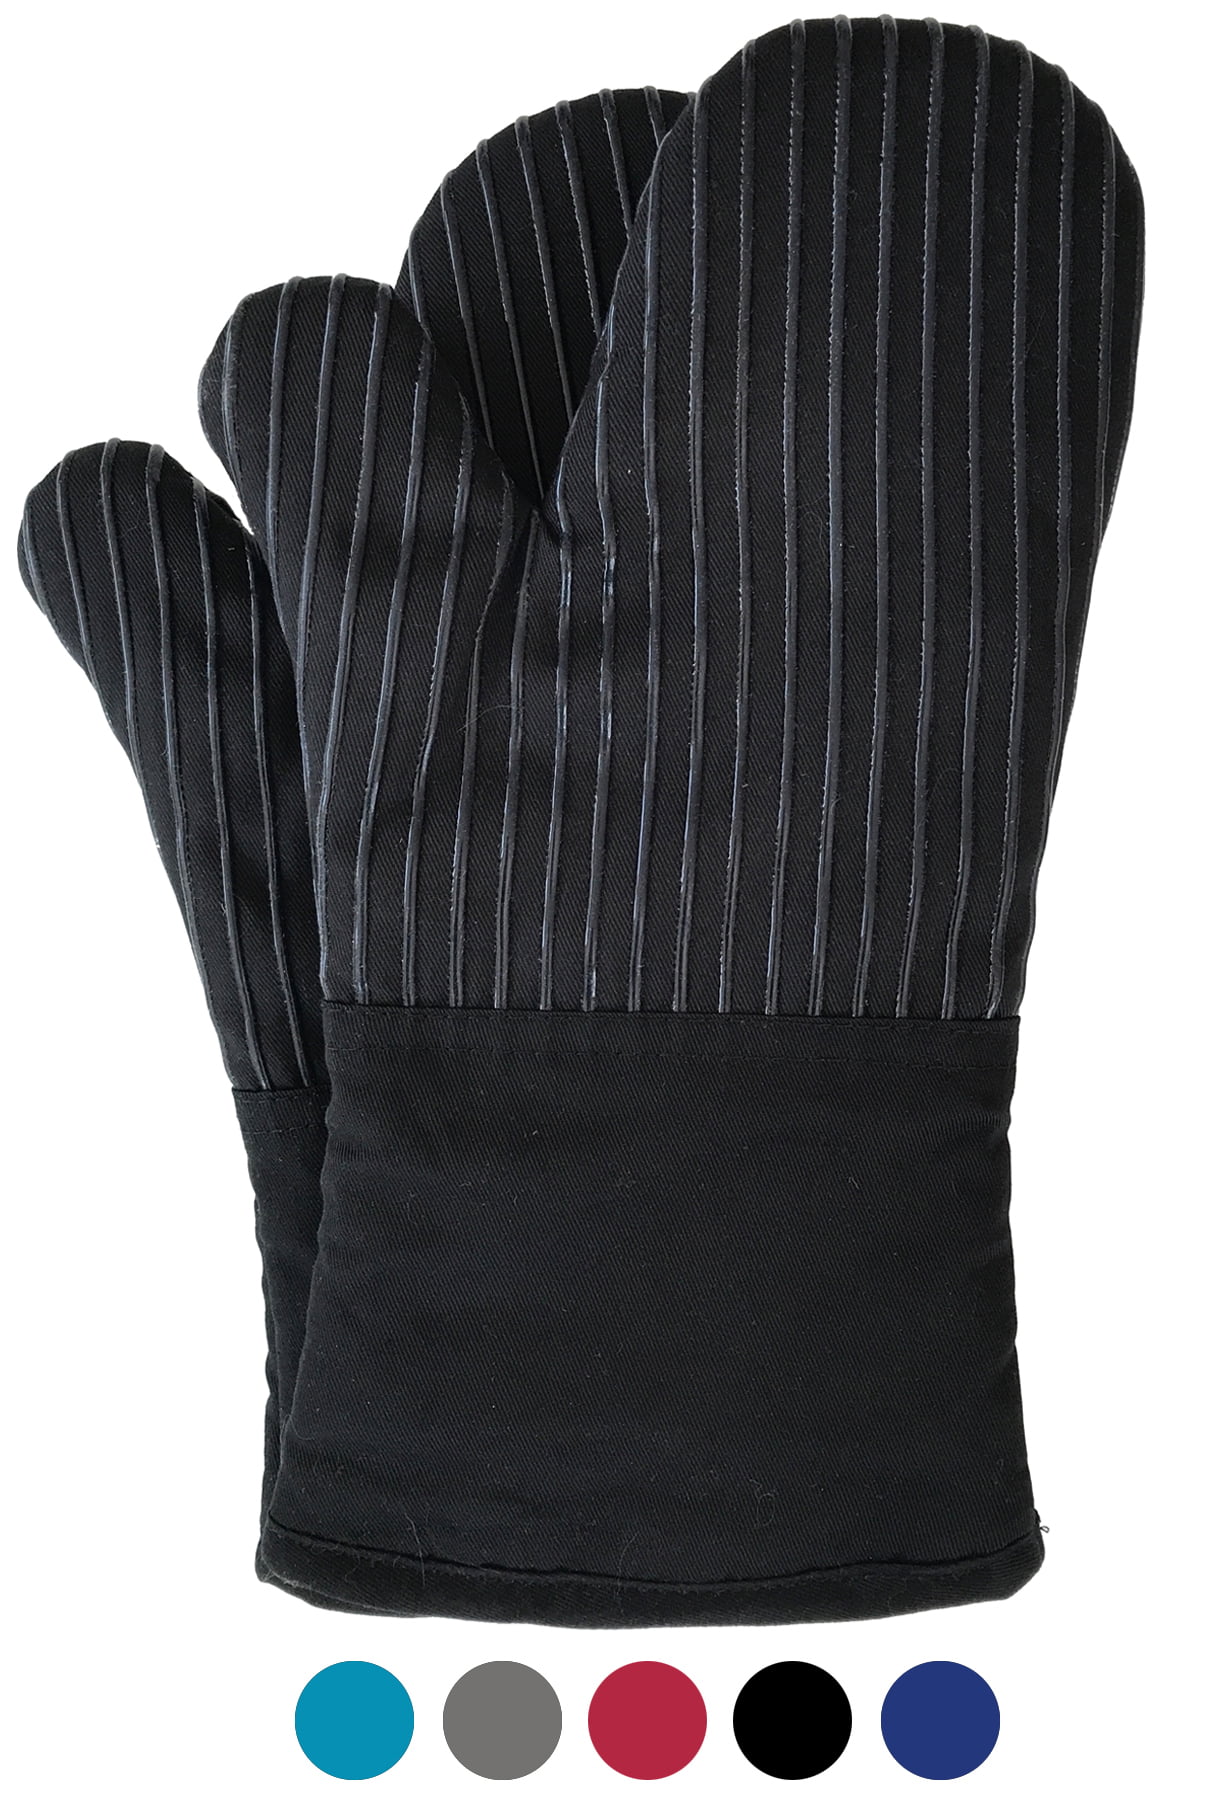 540°F Heat Proof Resistant Oven Glove BBQ Hot Surface Handler Kitchen Must Have 